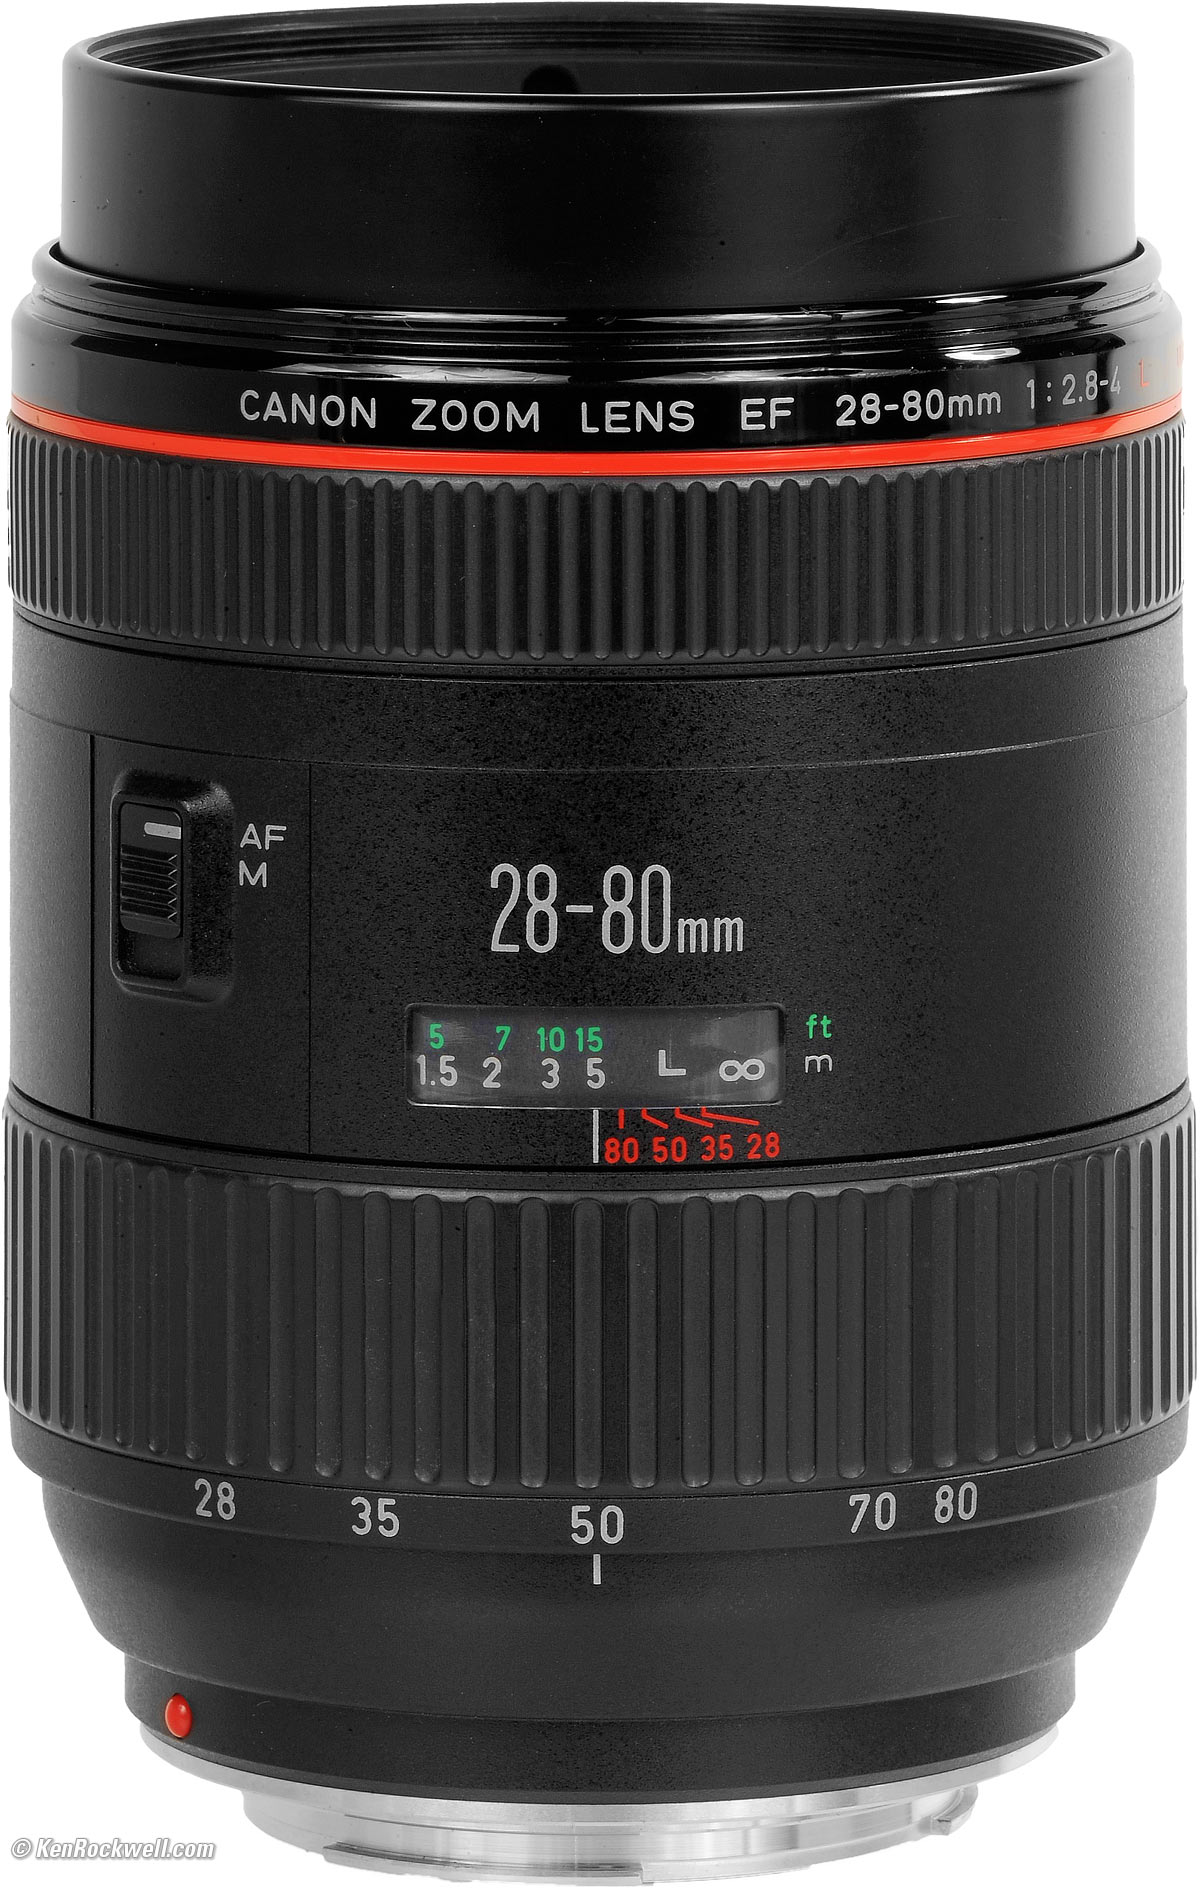 Canon EF 28-80mm f/2.8-4L USM Review